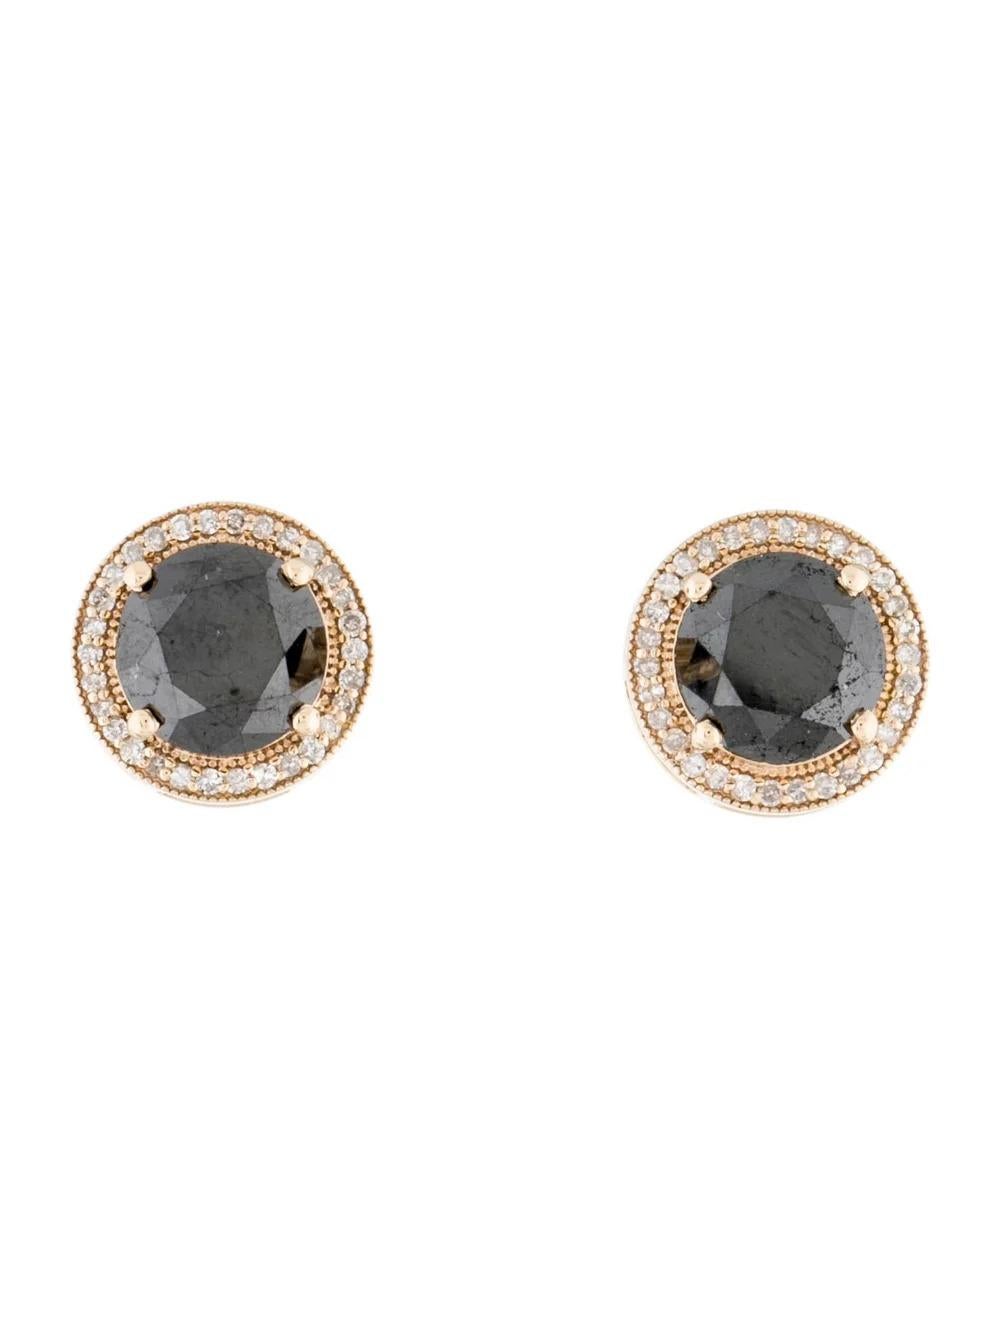 Discover elegance with these stunning 14K Yellow Gold Diamond Stud Earrings. Crafted to perfection, these earrings exude timeless sophistication and luxury.

Specifications:

* Material: 14K Yellow Gold
* Length: 0.5 inches
* Width: 0.5 inches
*